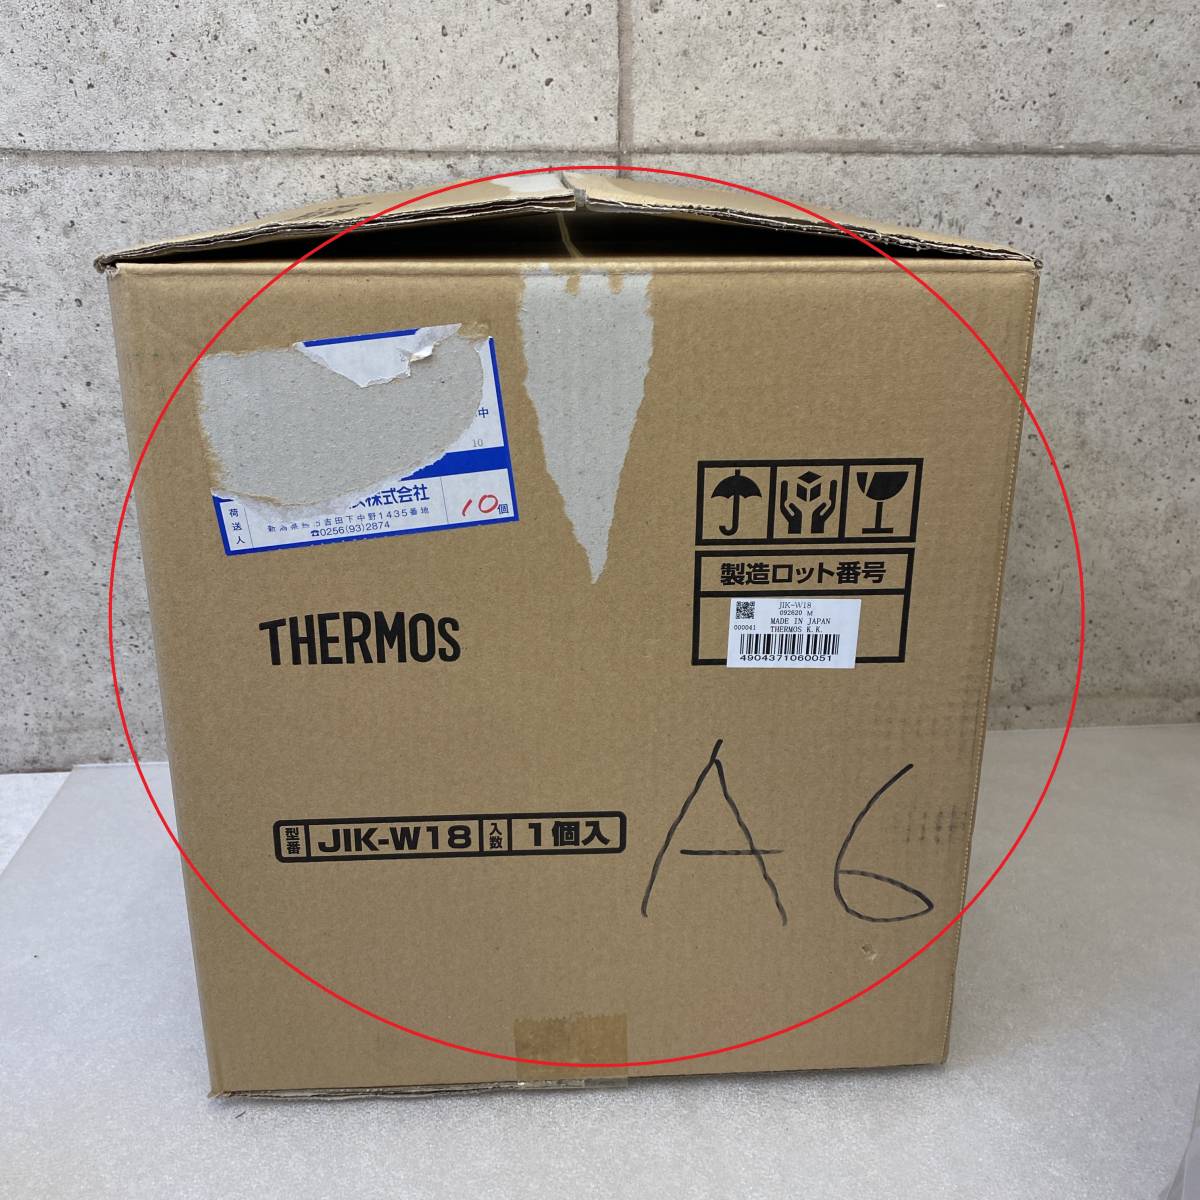 [ price cut Saitama departure free shipping ] new goods unused business use height performance heat insulation meal can Thermos JIK-W18 18L original box * manual attaching kitchen . meal distribution meal A217-4